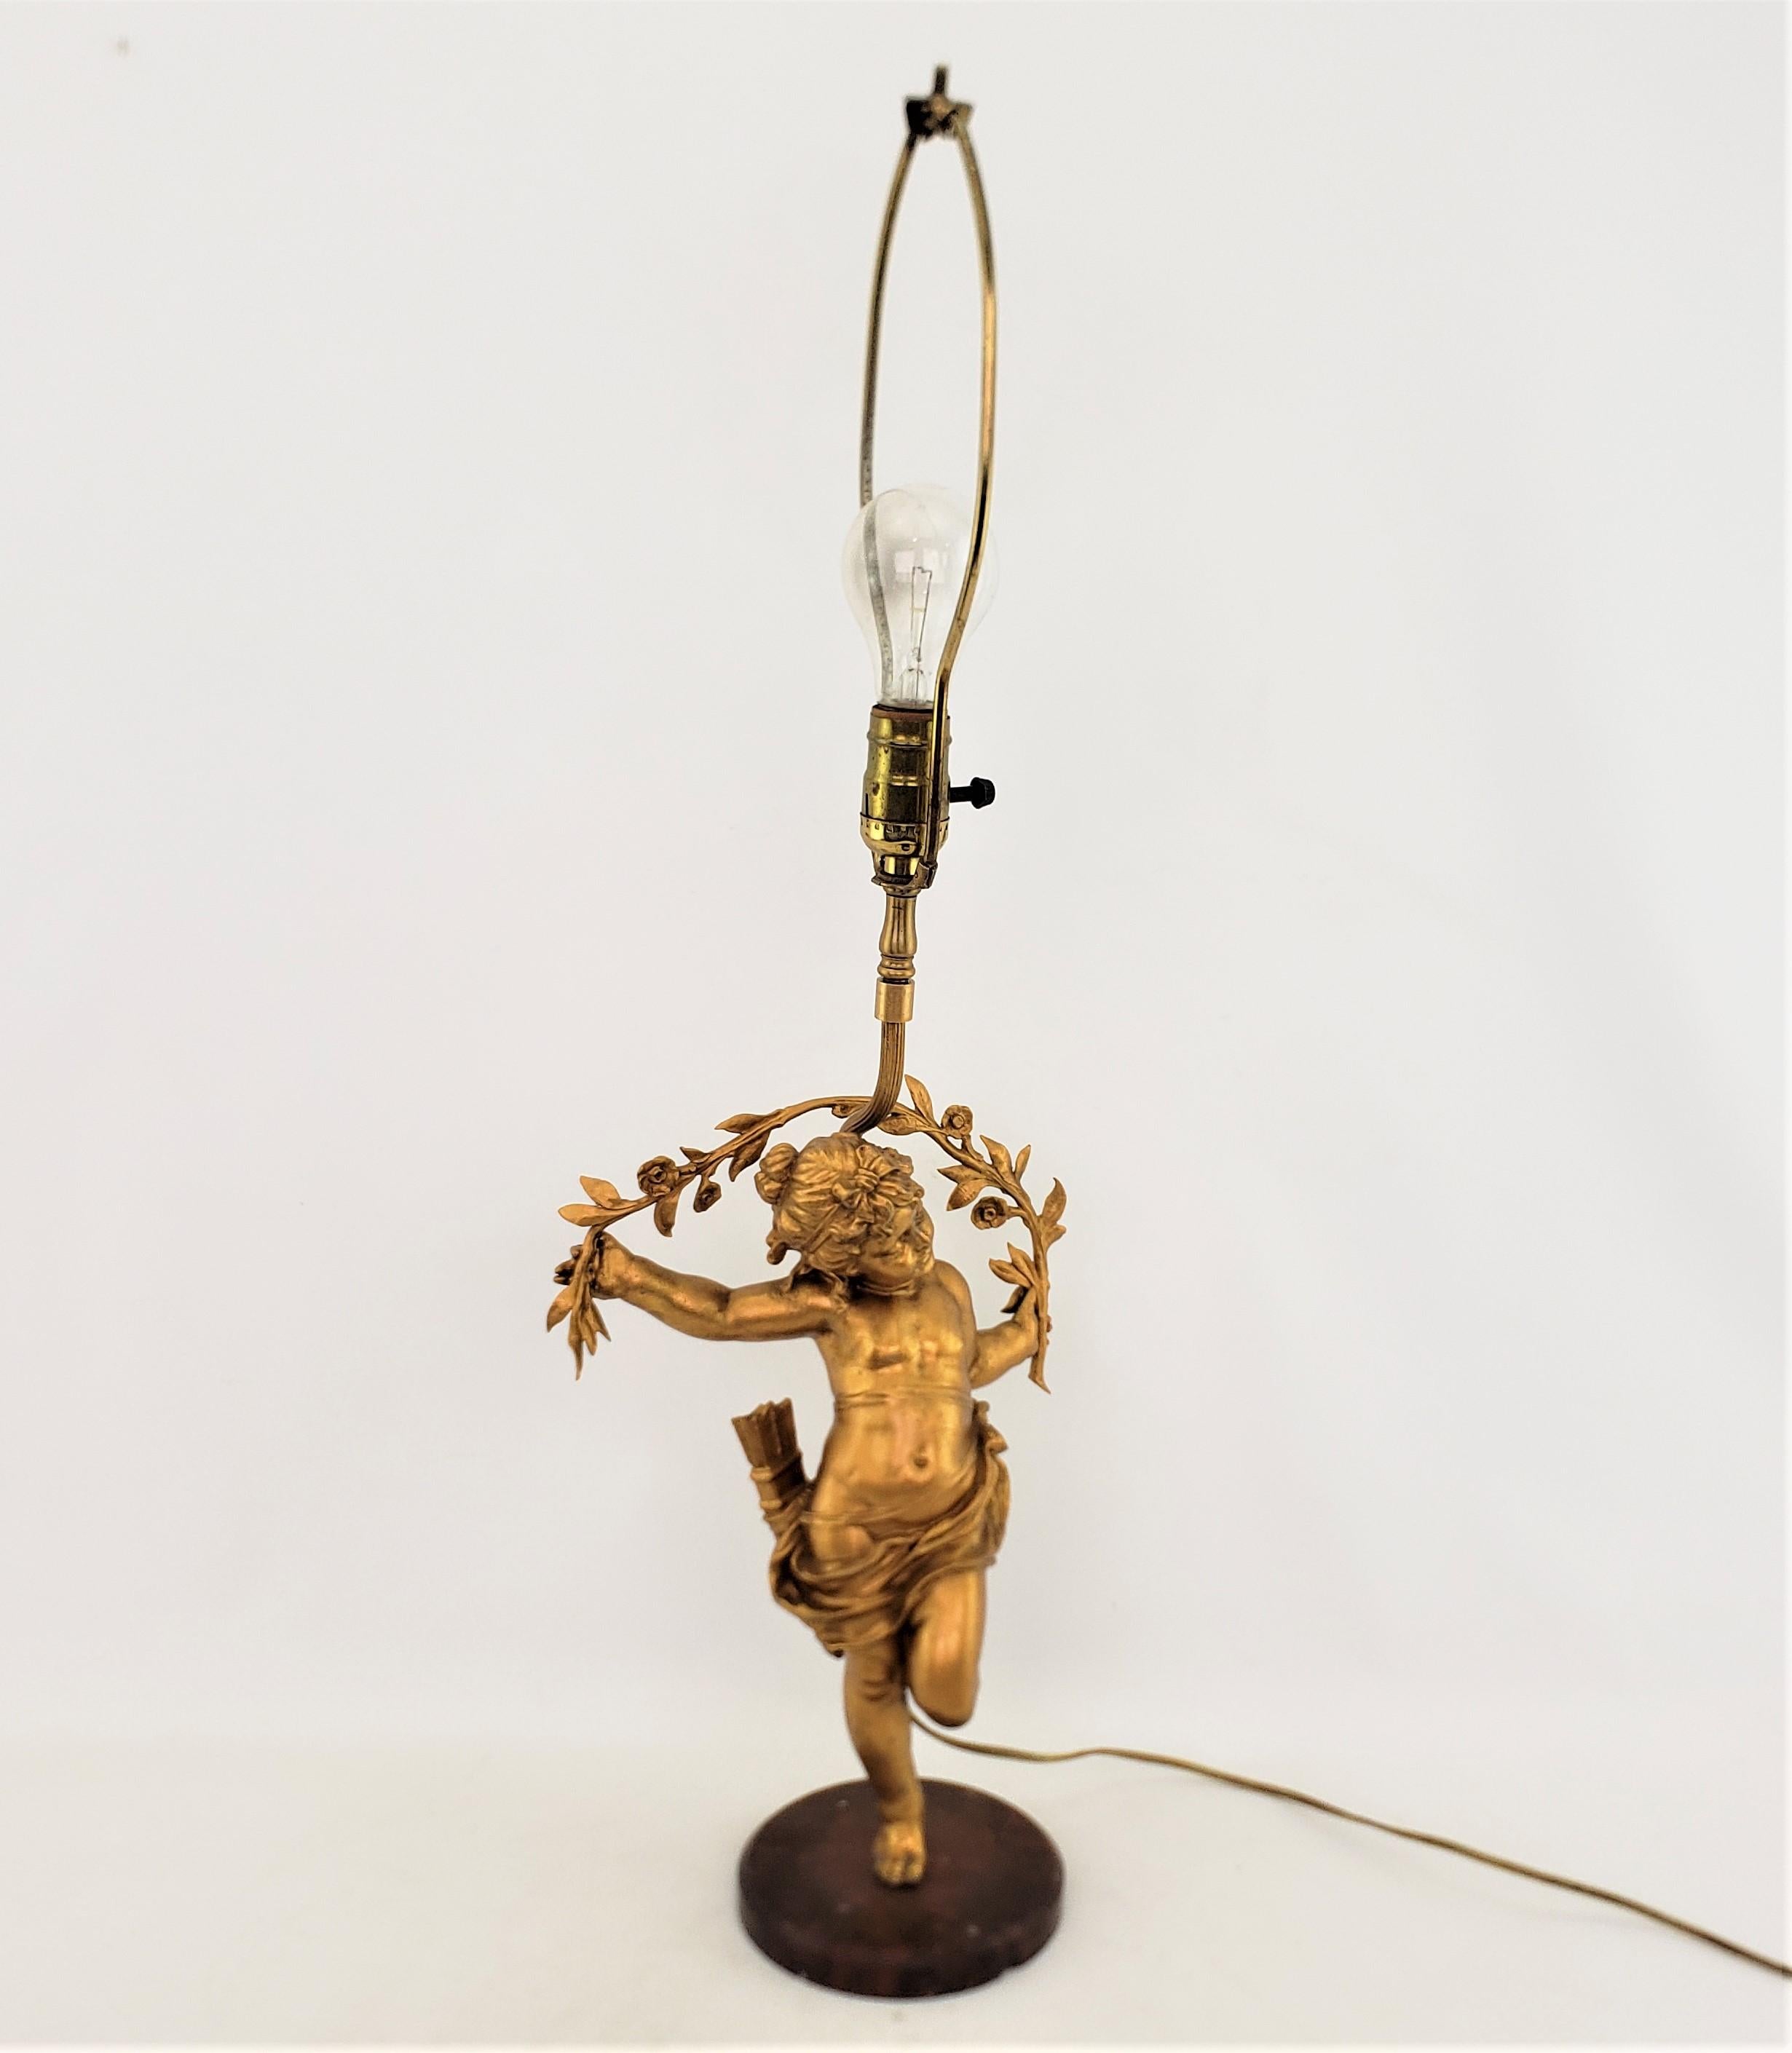 Antique Ornately Cast & Gilt Finished Sculptural Cherub Table Lamp In Good Condition For Sale In Hamilton, Ontario